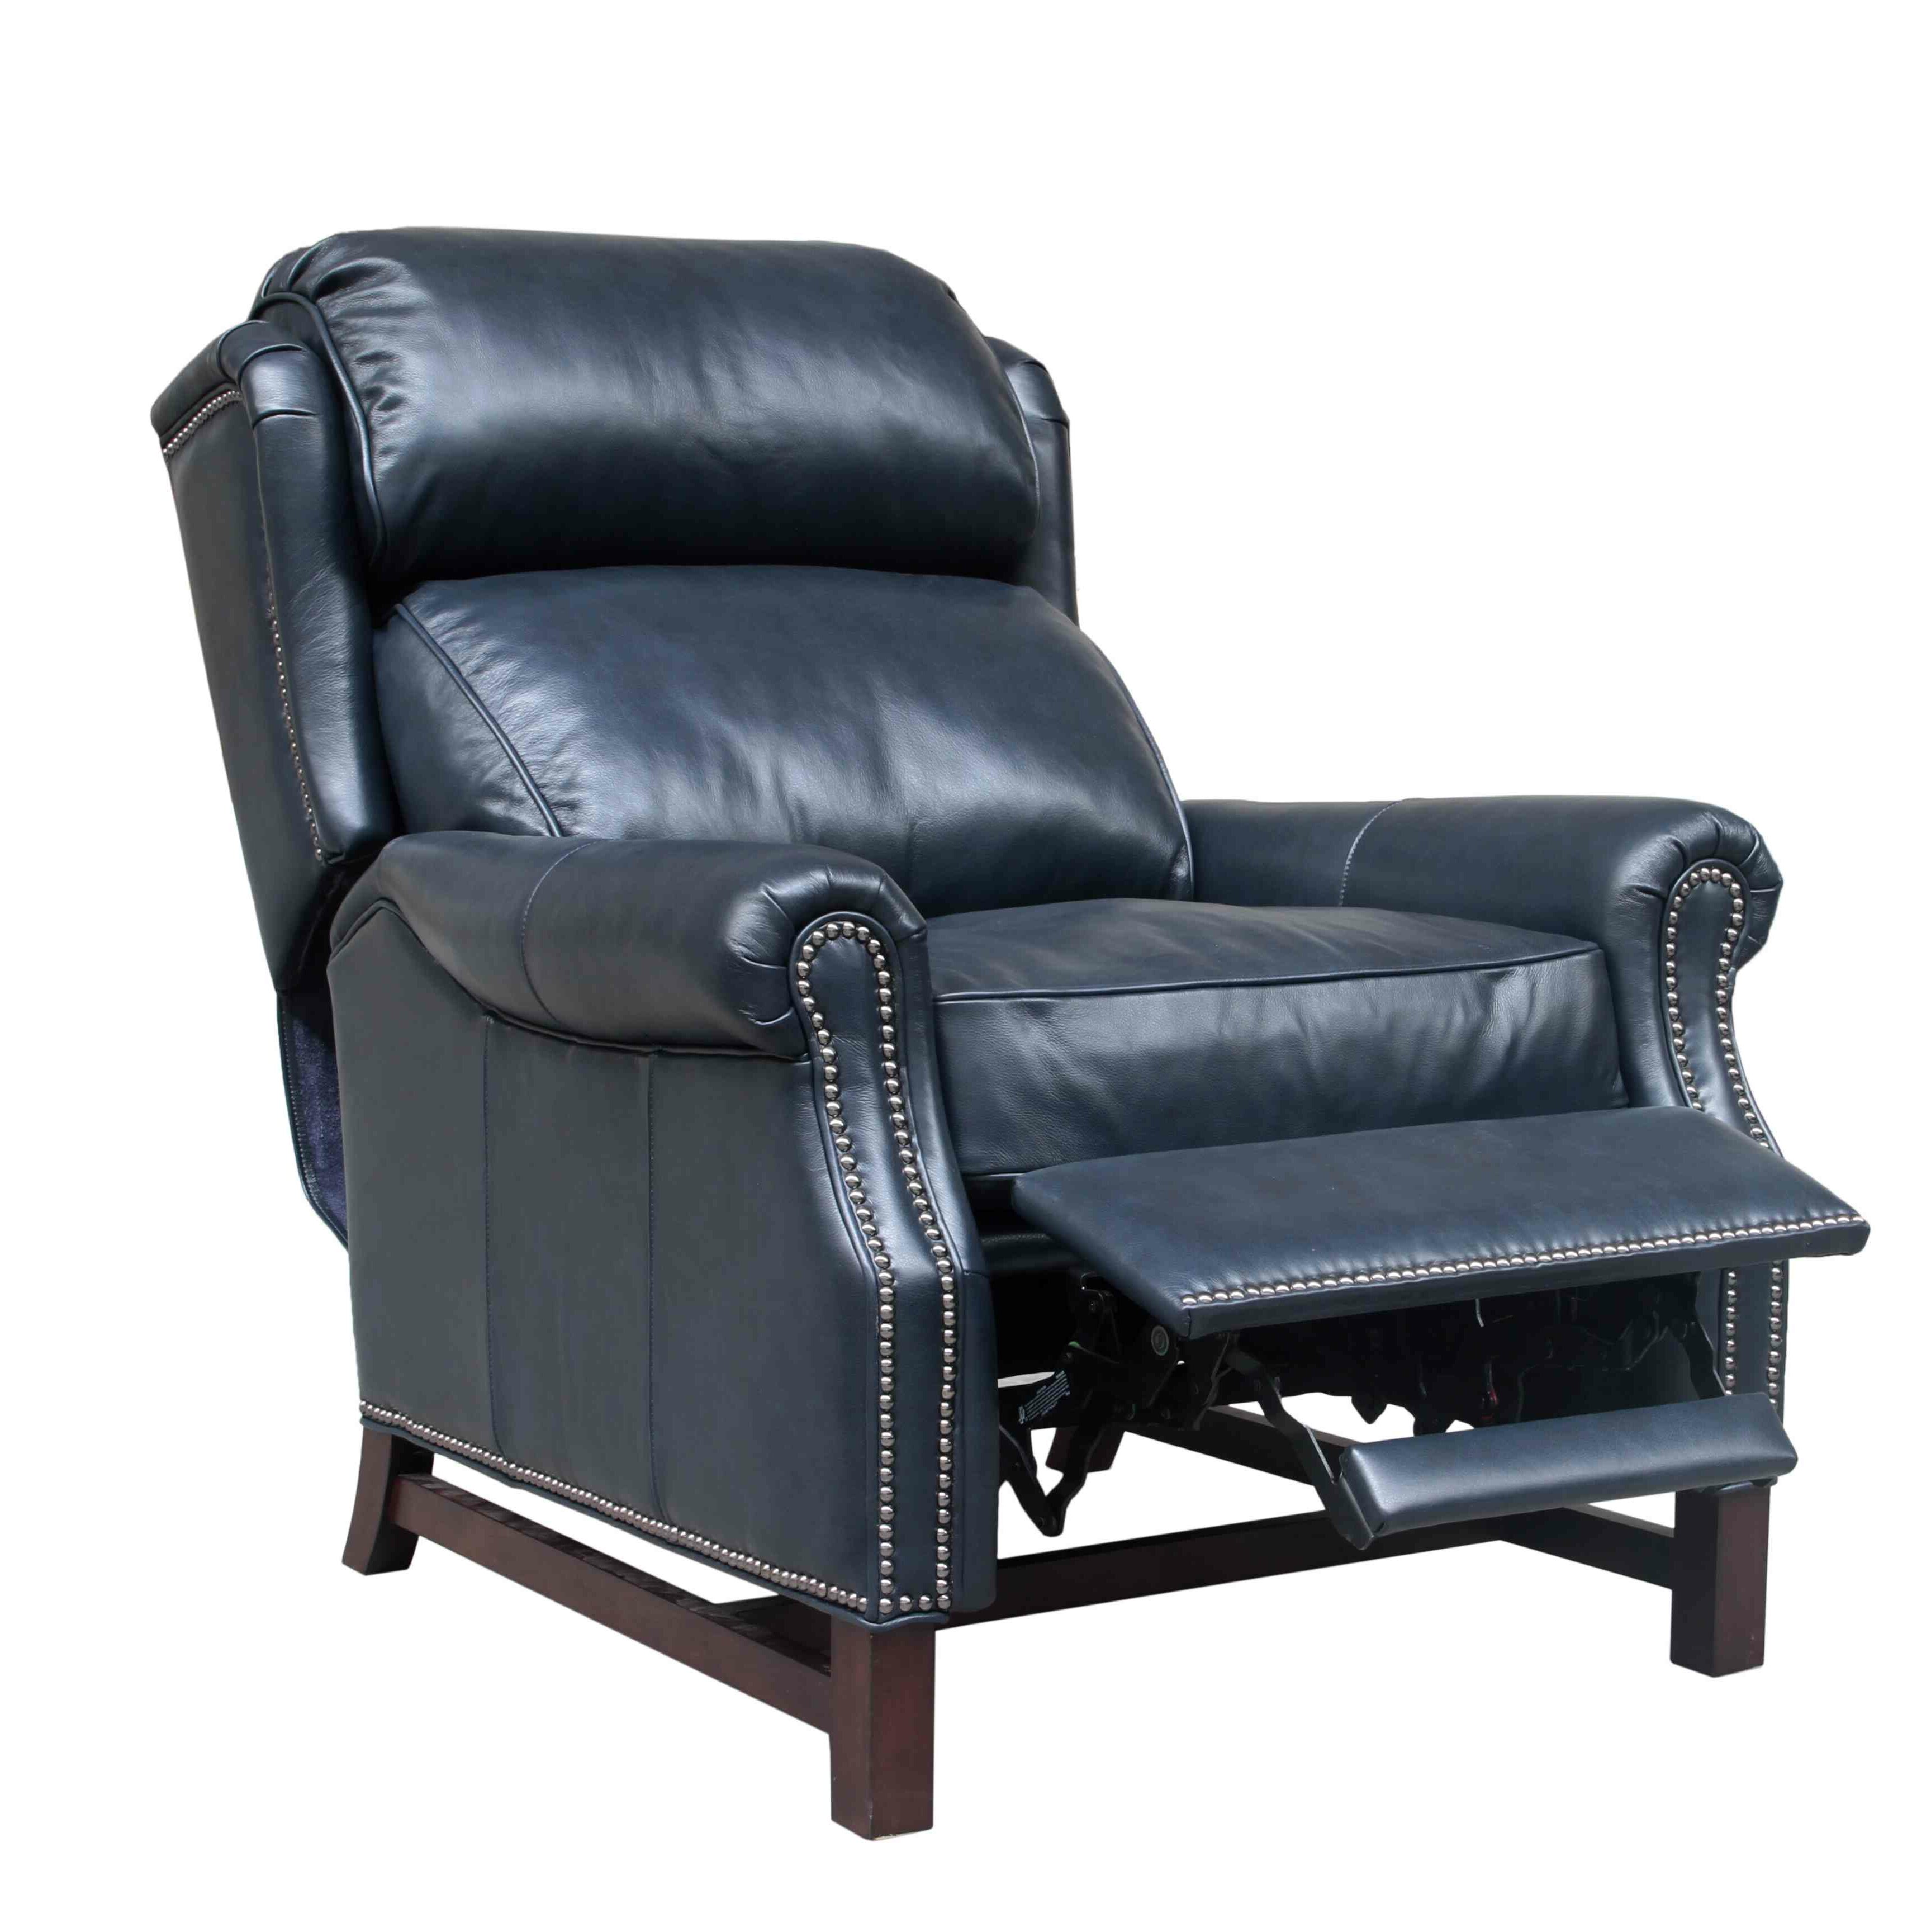 Manchester 35” Wide Genuine Leather Manual Wing Chair Recliner